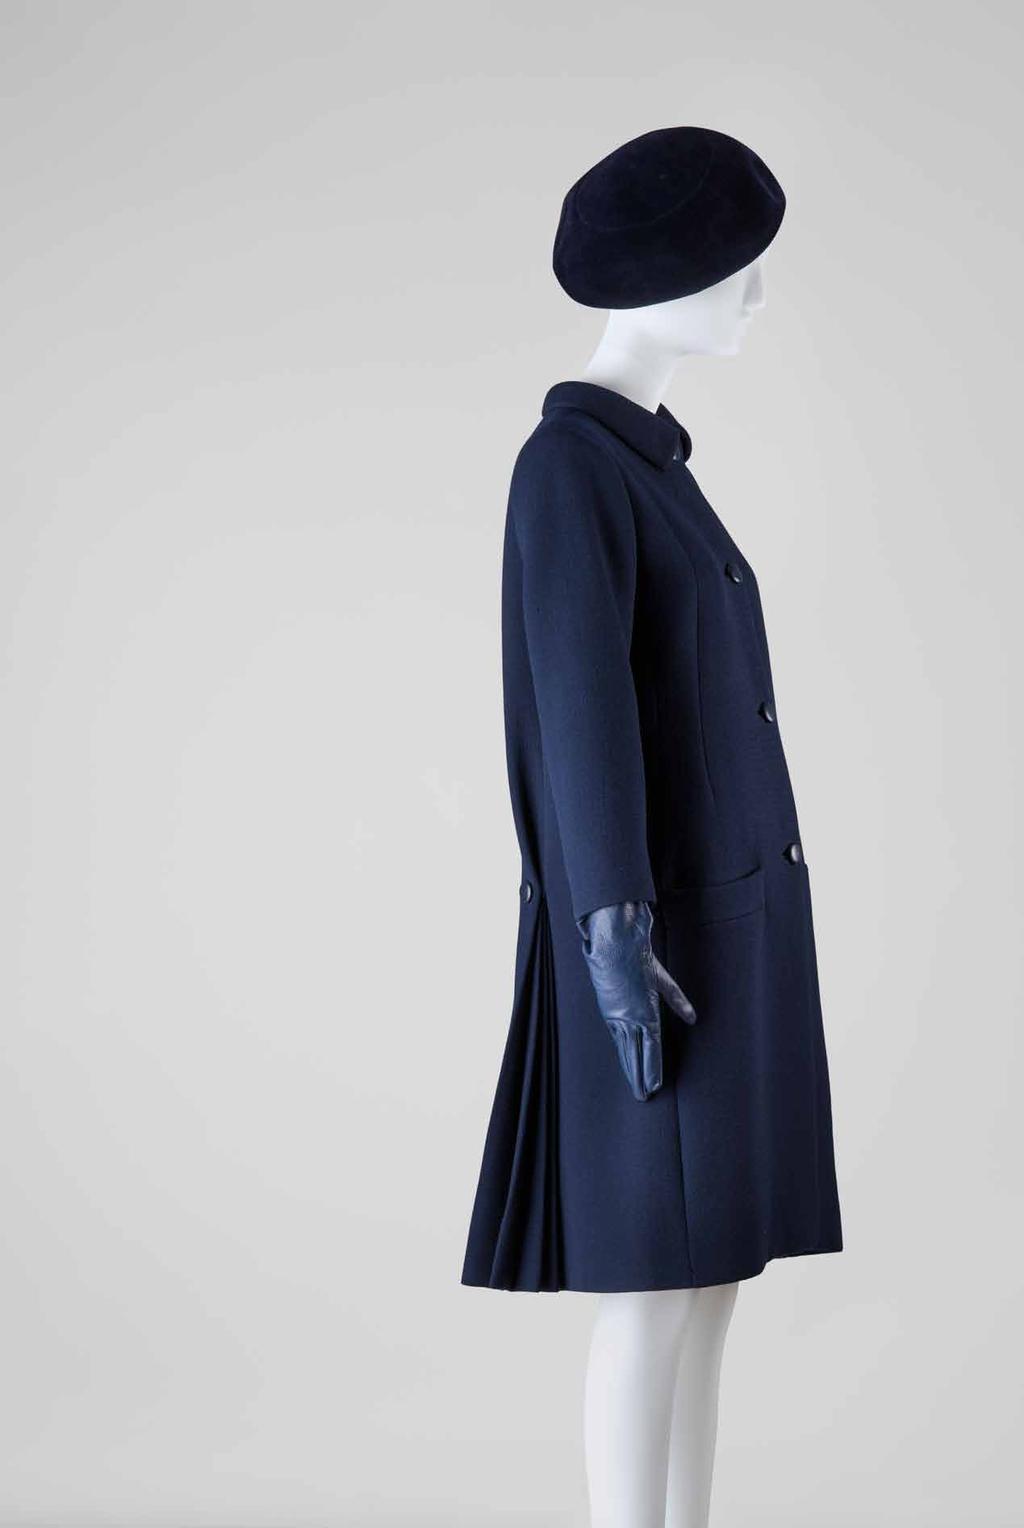 Mrs. Mellon and her World Navy blue wool serge coat with a panel of four pleats at the back. balenciaga. paris. August 1937. cbm 2004.37 Mrs.